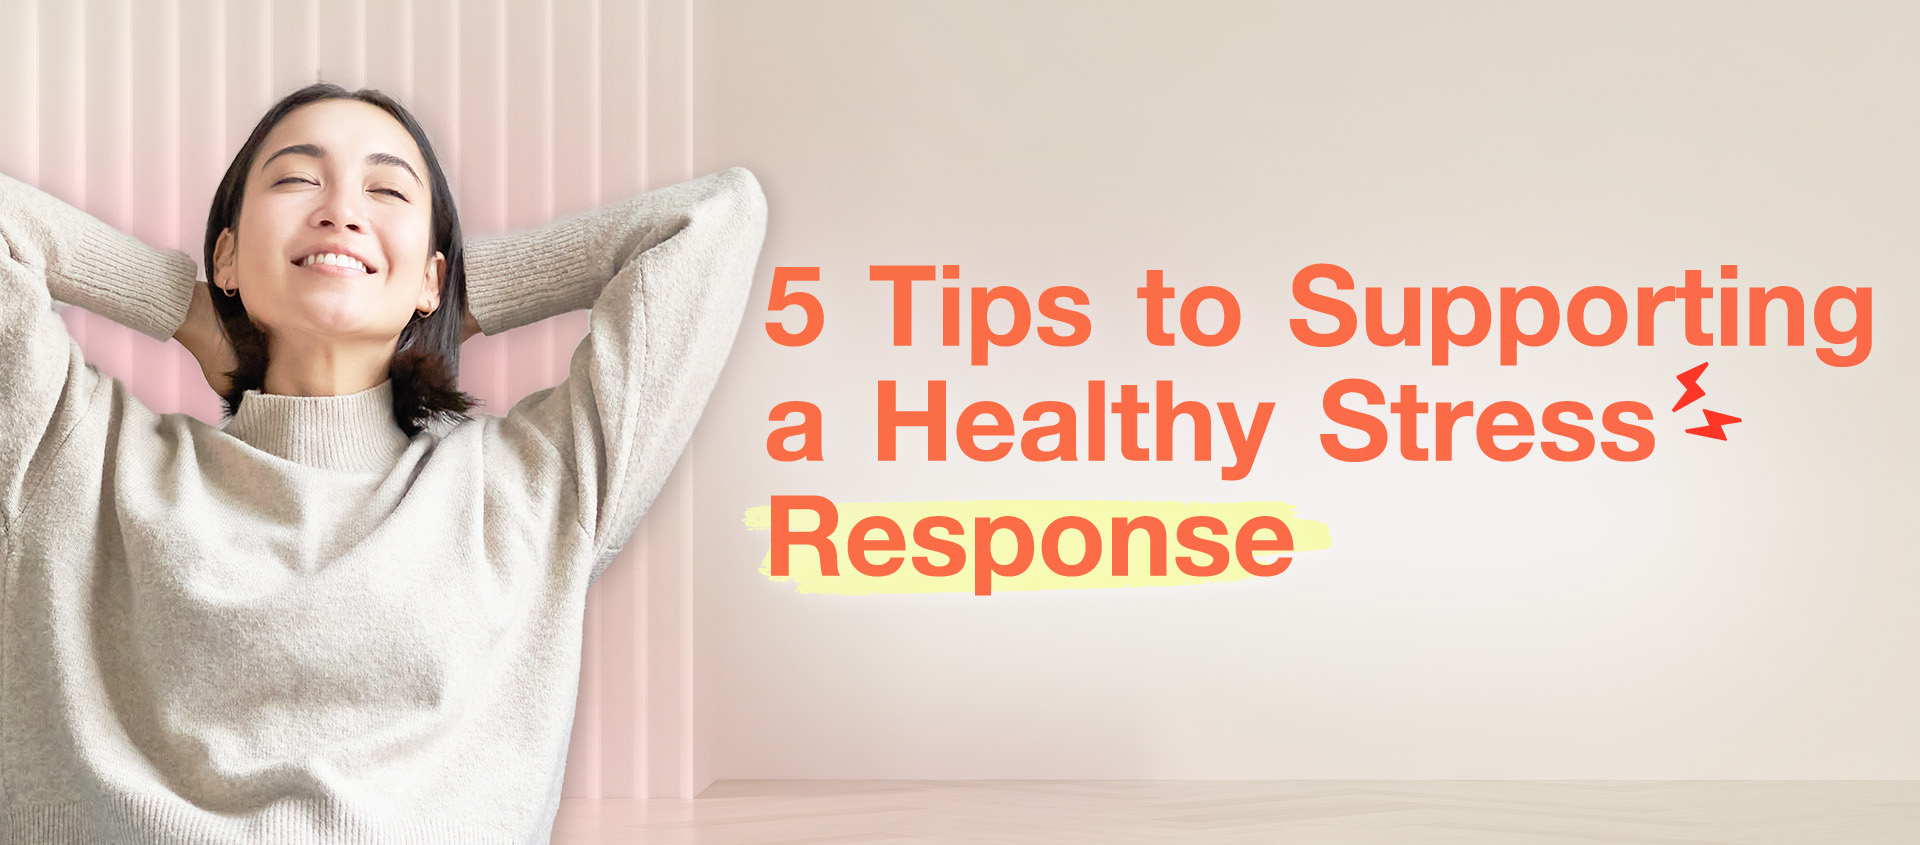 5 Tips to Supporting a Healthy Stress Response